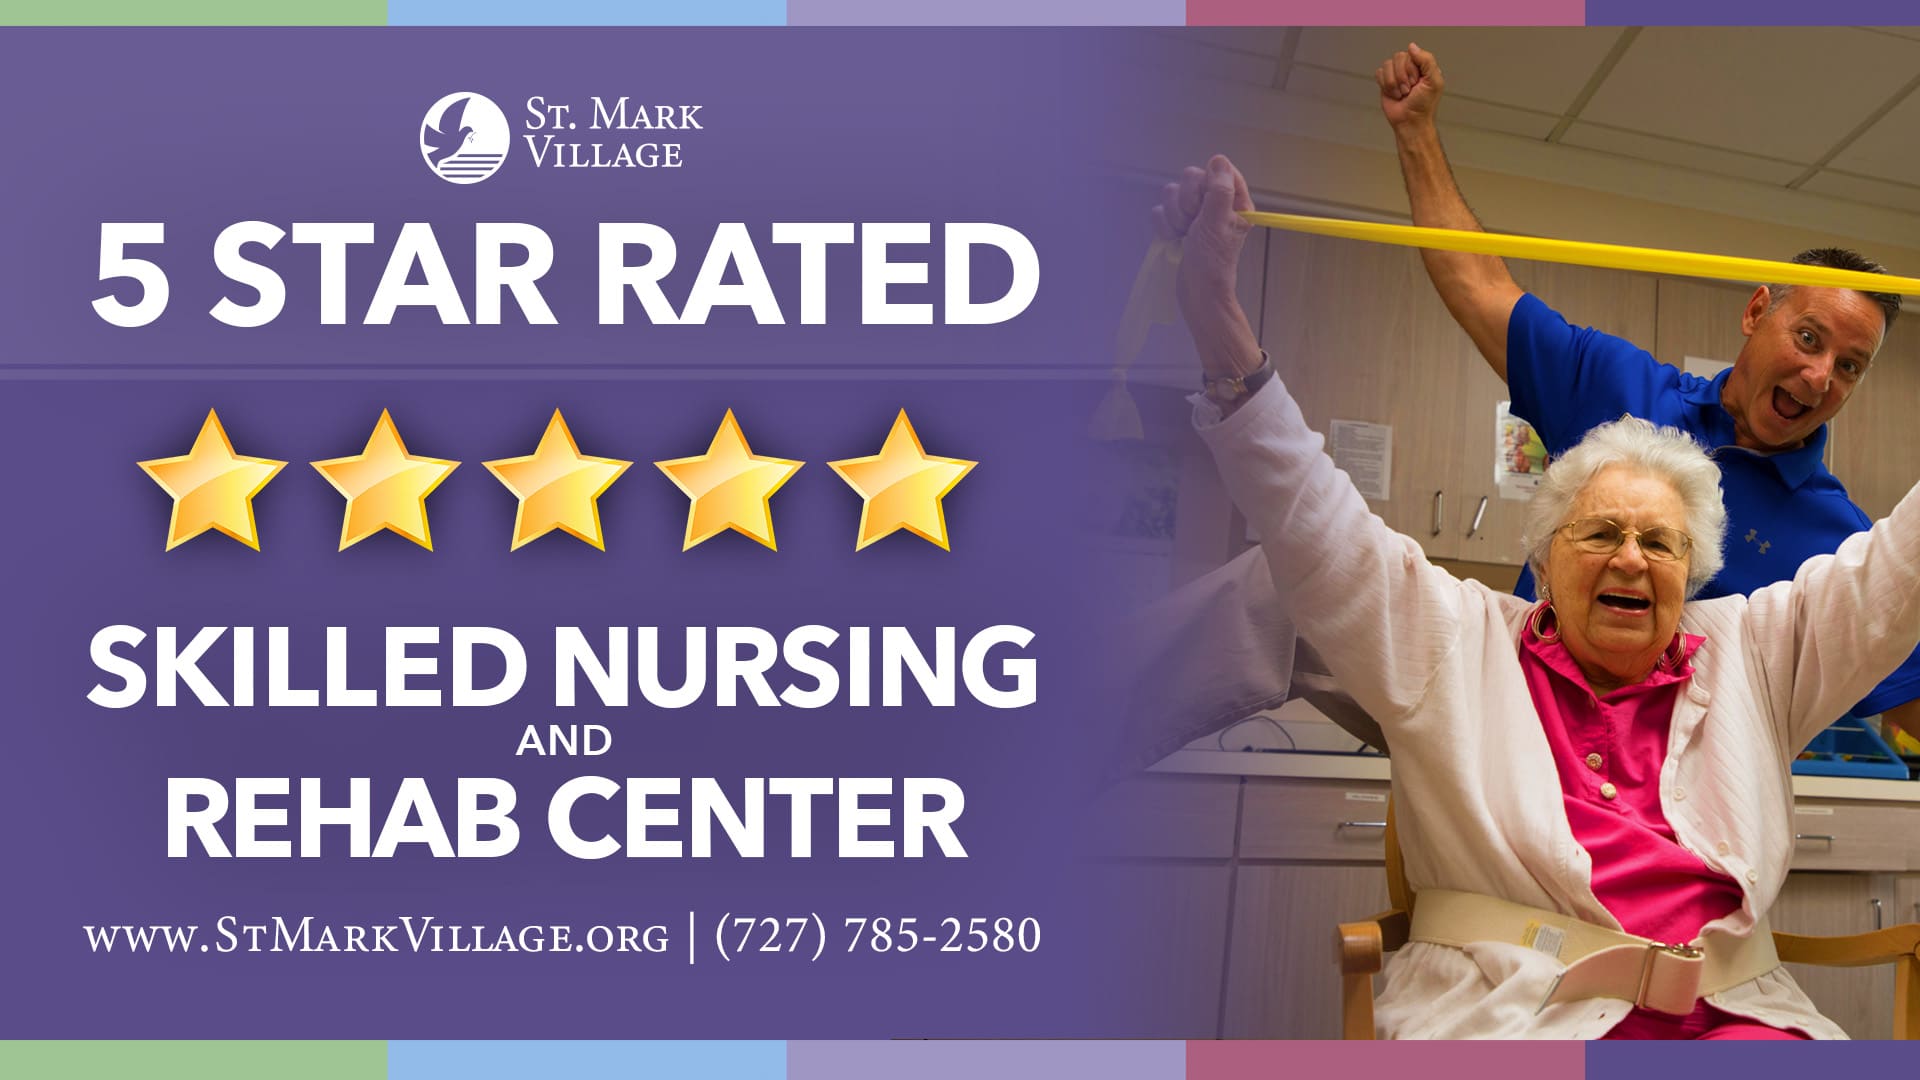 5 star rated skilled nursing and rehab center.